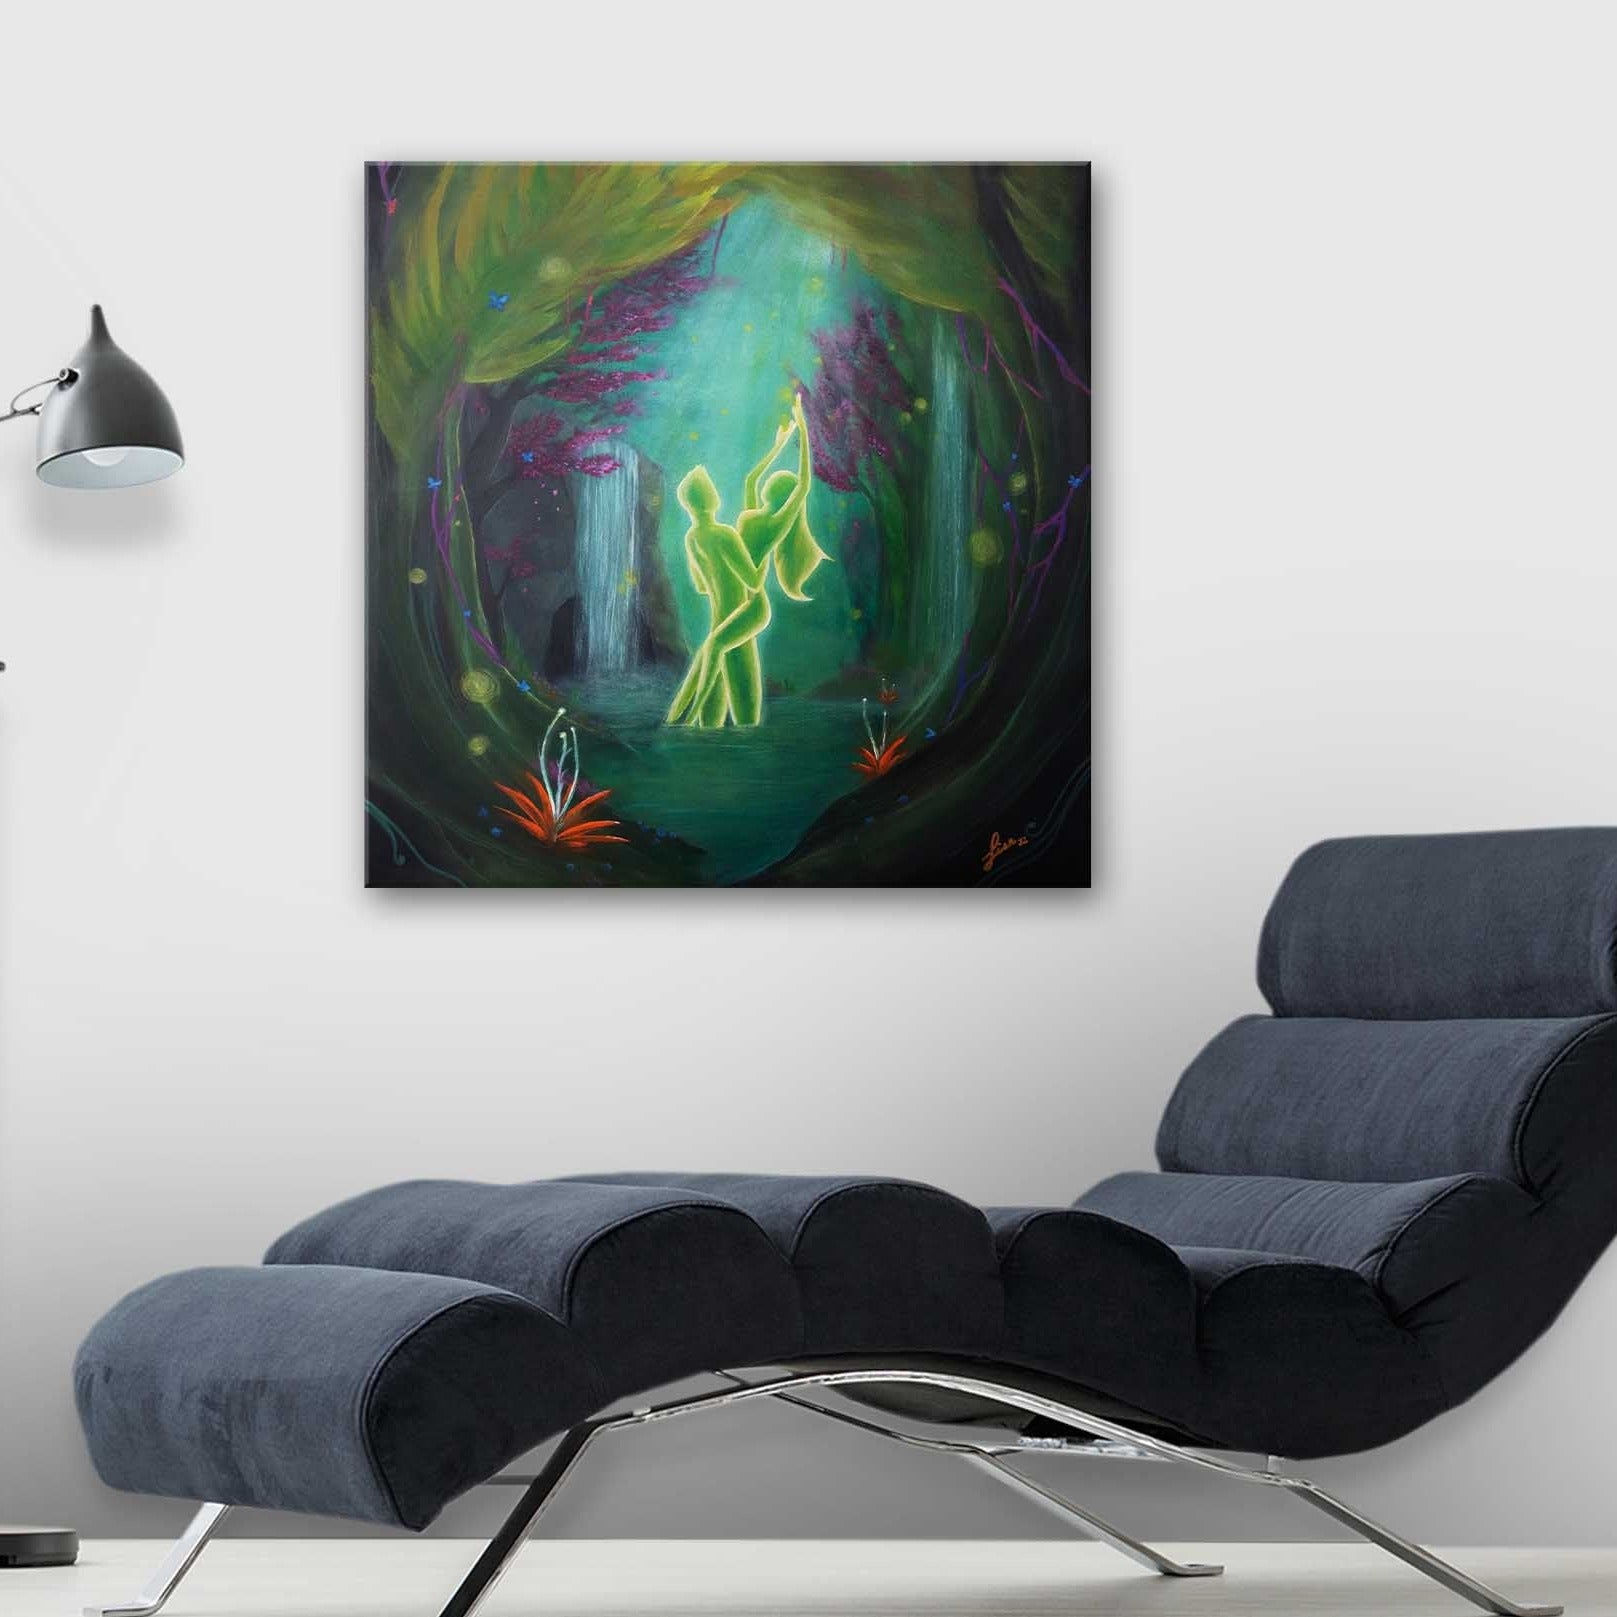 Soulmate Art, Spiritual Painting, Chakra art, Fantasy, Twin Flames Reunion, Surreal and Romantic gift, Acrylic painting on canvas, flammes jumelles, axys, fantastique, magie, amoureux